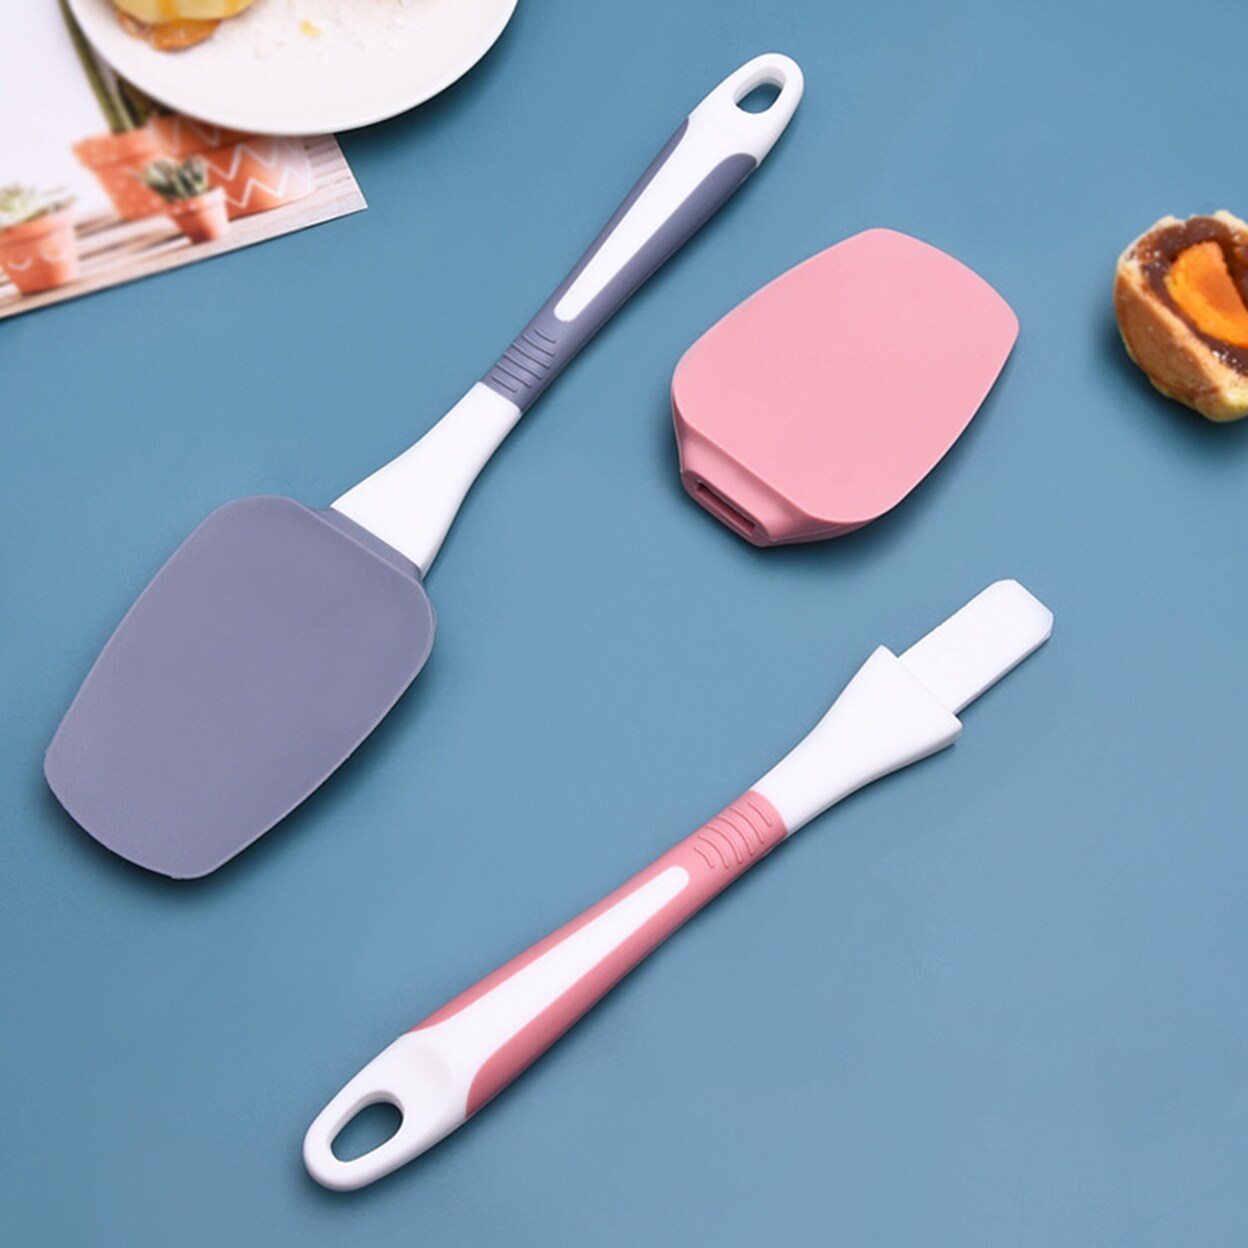 https://ak1.ostkcdn.com/images/products/is/images/direct/1dd7cdc3dc01809d12886a77e18d9a859b0b1cc8/Cream-Scraper-NonStick-OnePiece-Design-Silicone-Baking-Spatula-Oil-Brush-Tool-For-Bakery.jpg